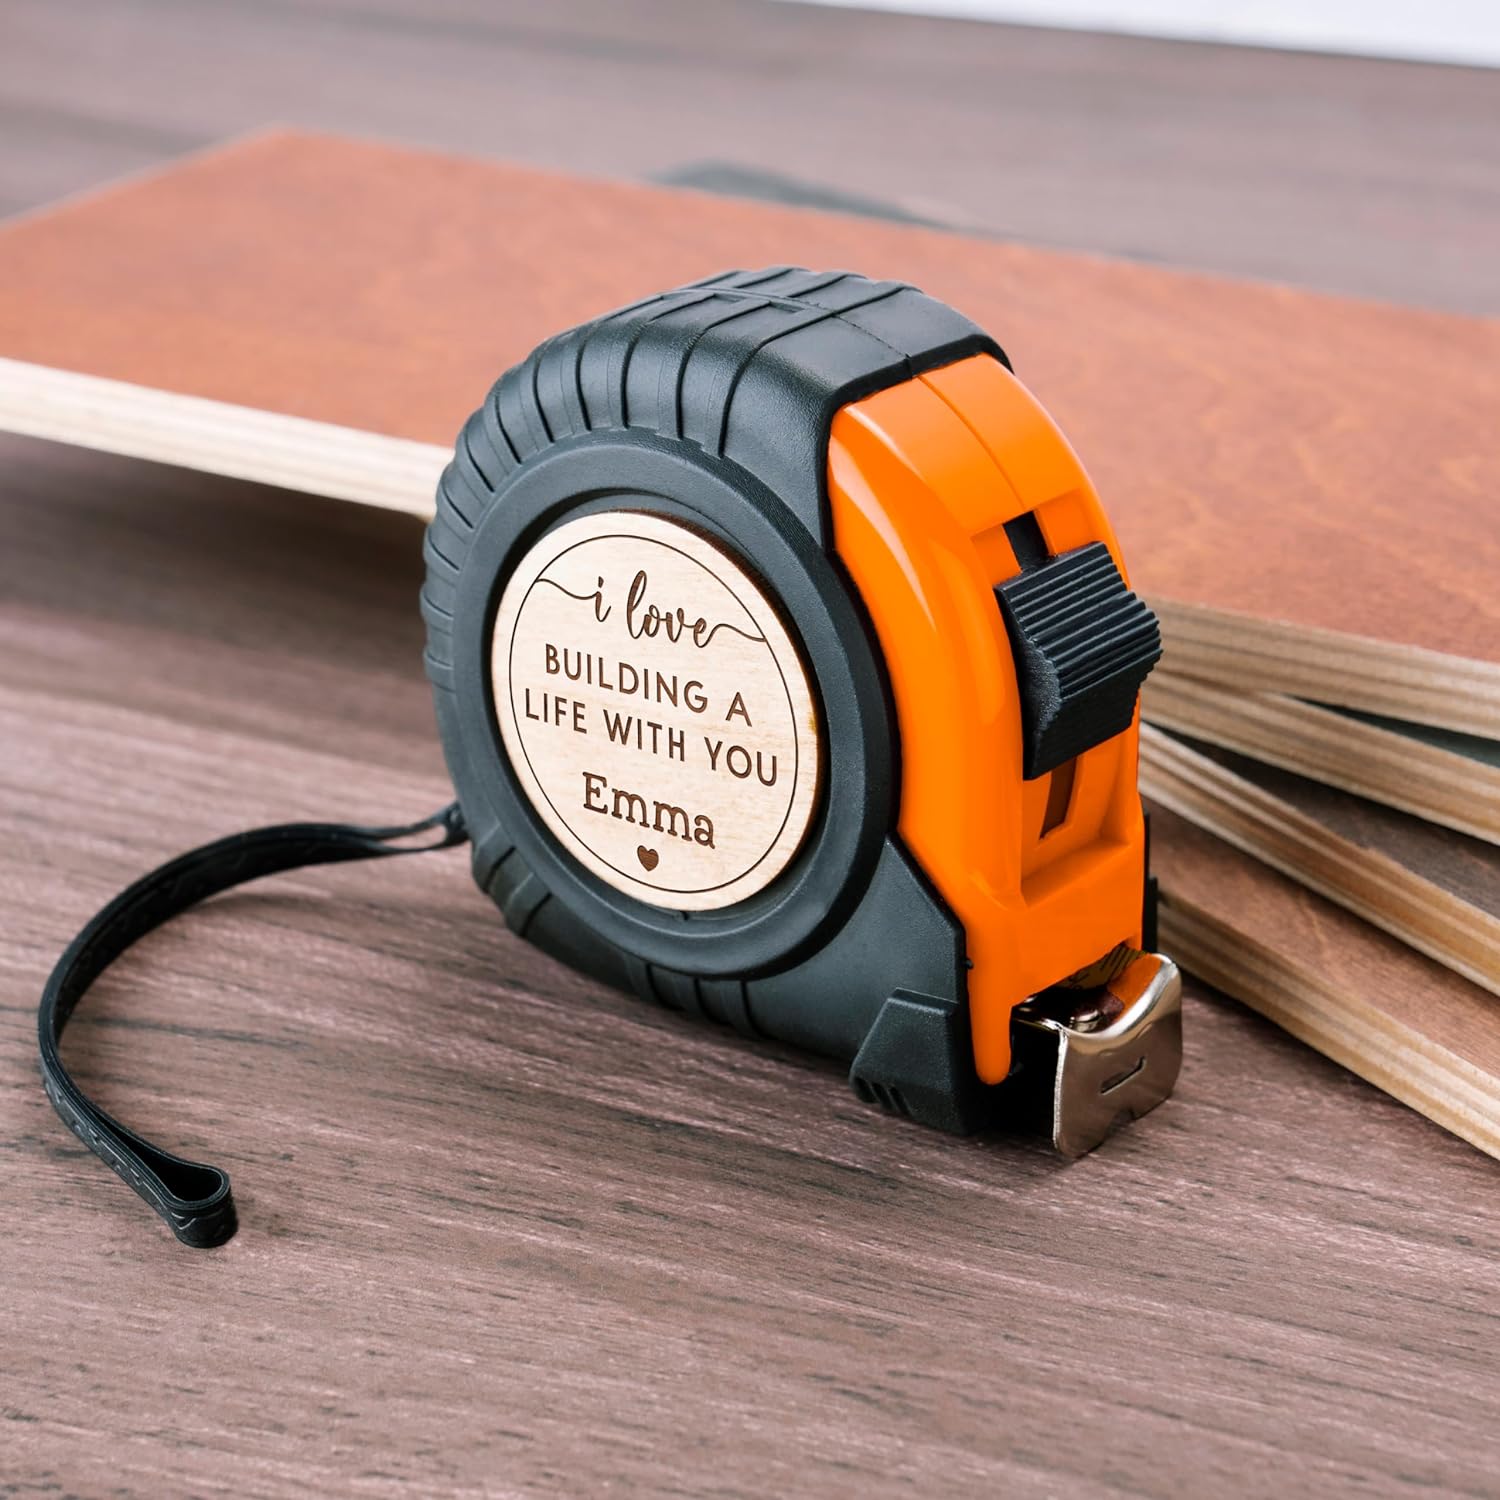 Tape Measure Personalized for Boyfriend, Husband, Men, I Love Building Life with You, 2 Optional Sizes, Gifts for Men, Custom Engraved Tape Measure, Valentines Gifts for Boyfriend